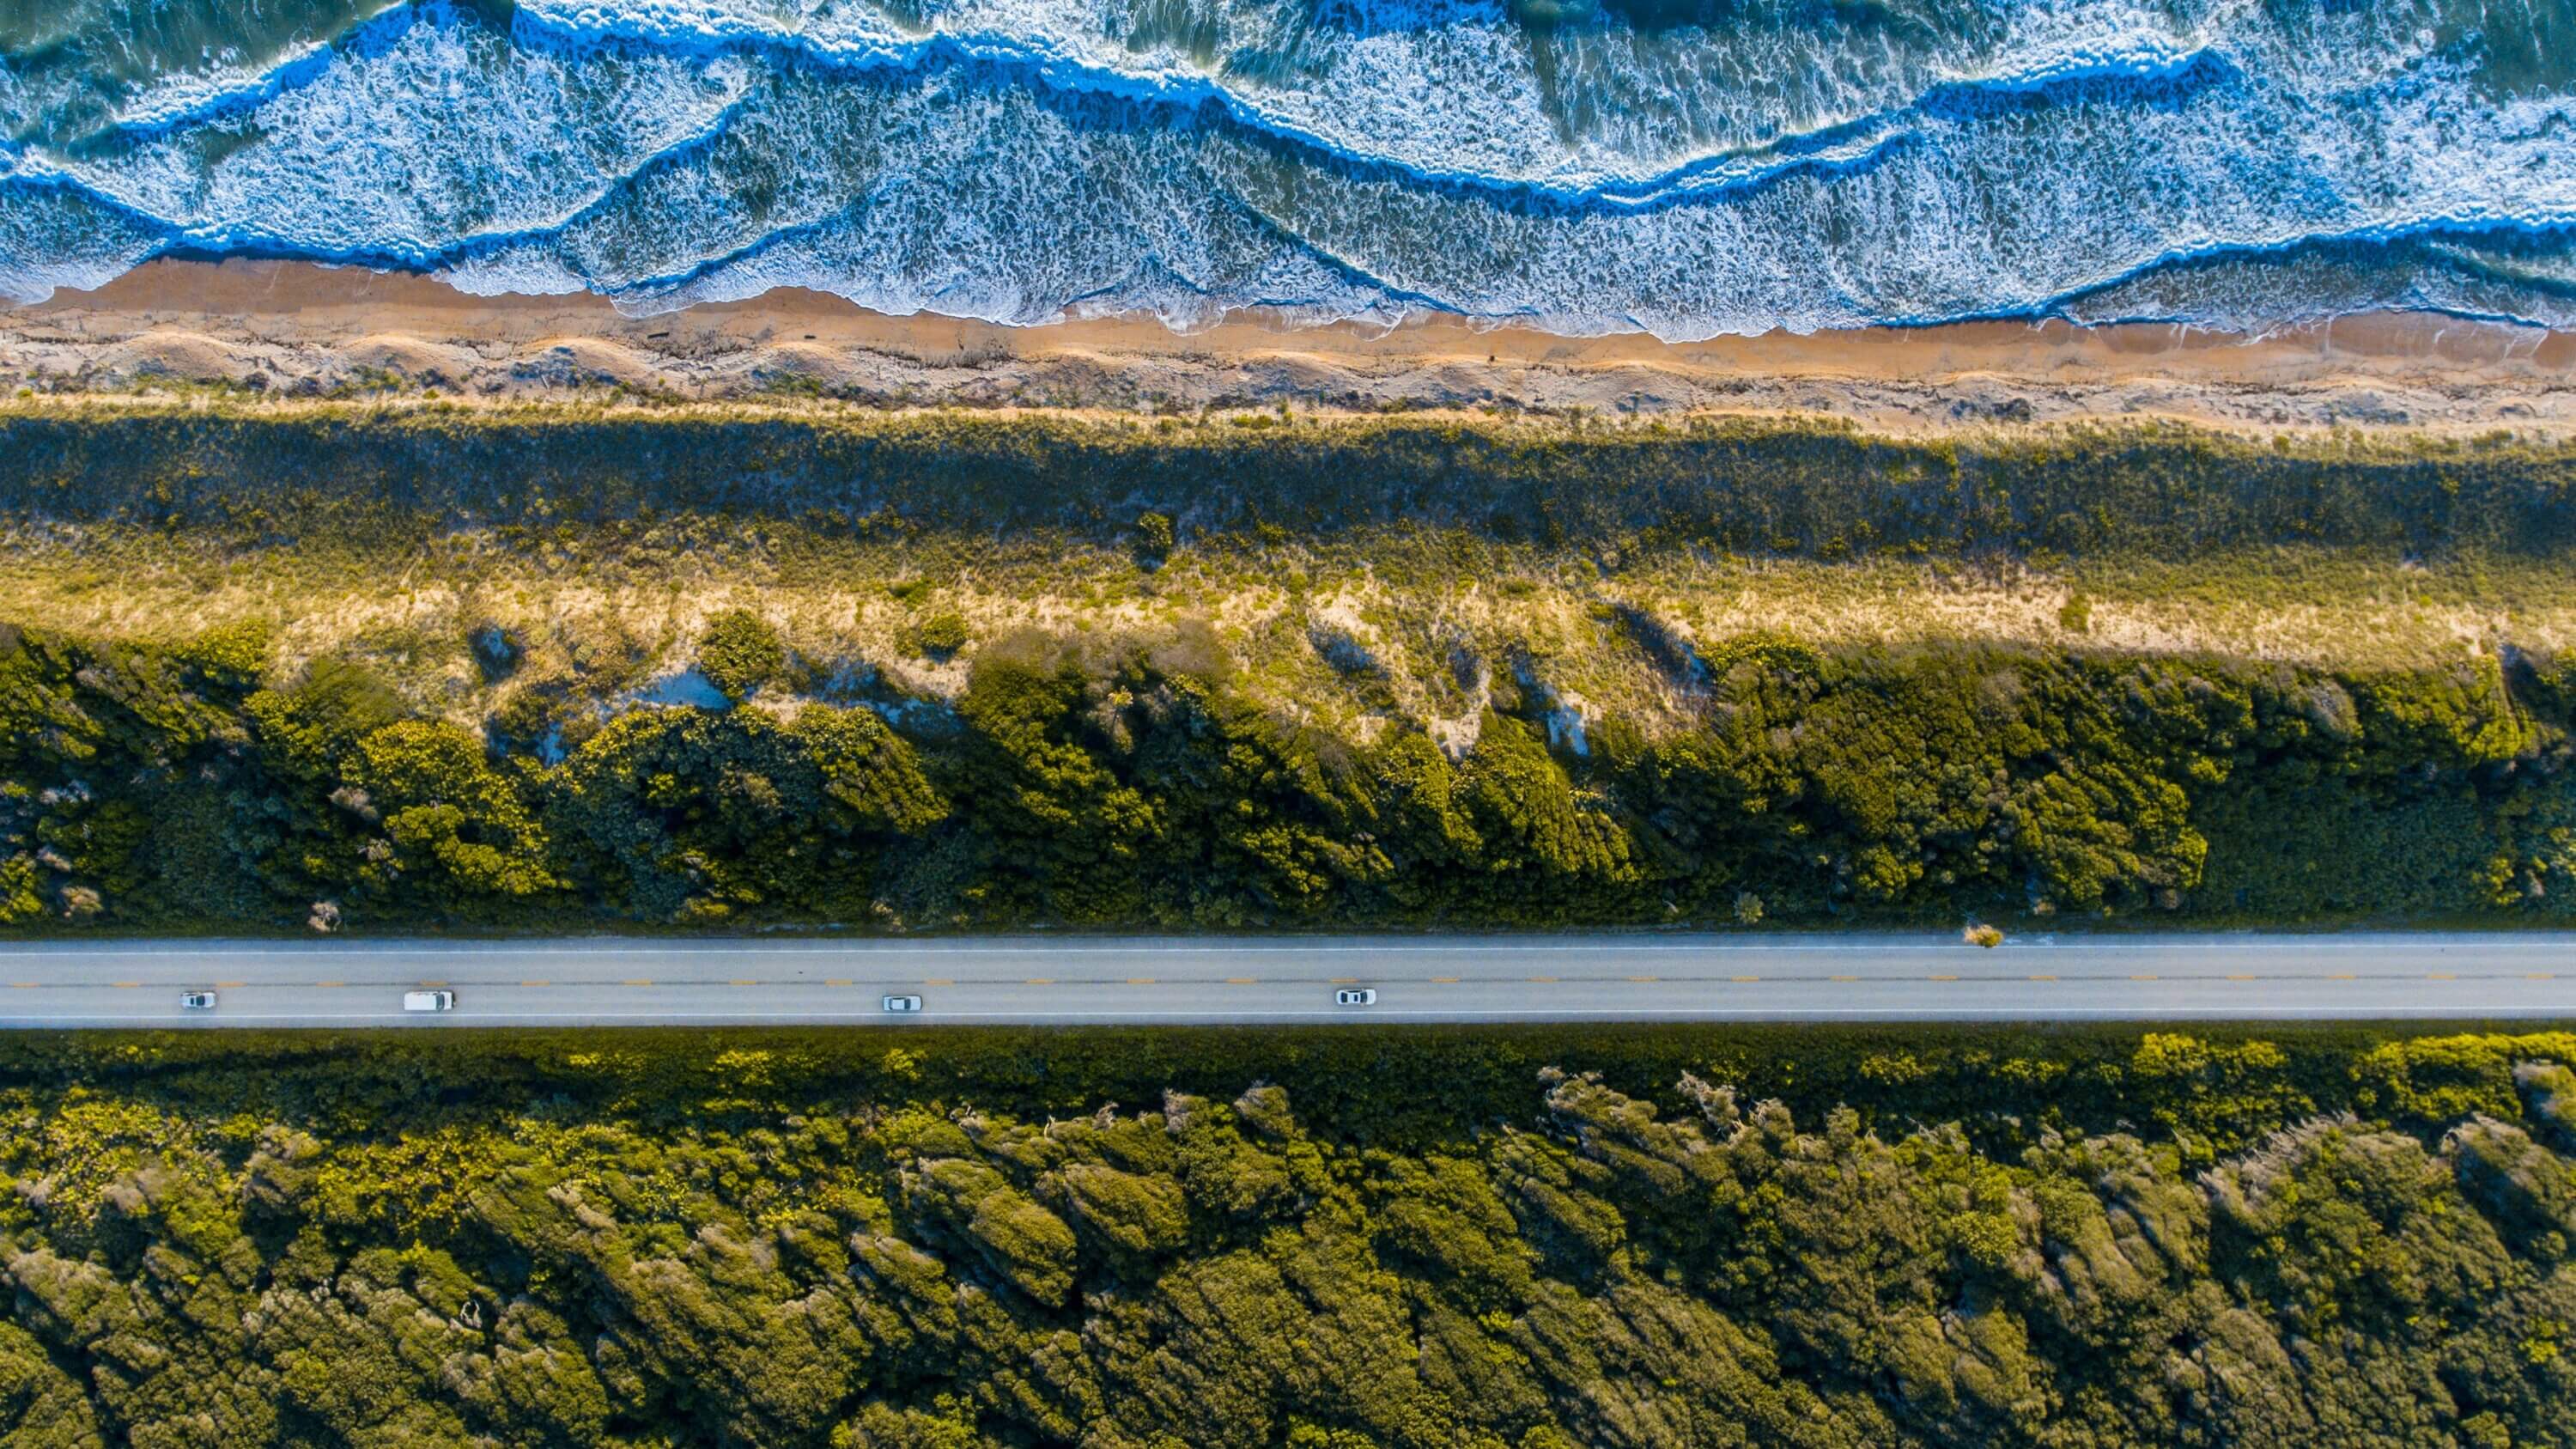 A bird's eye view of a road and trees beside the ocean